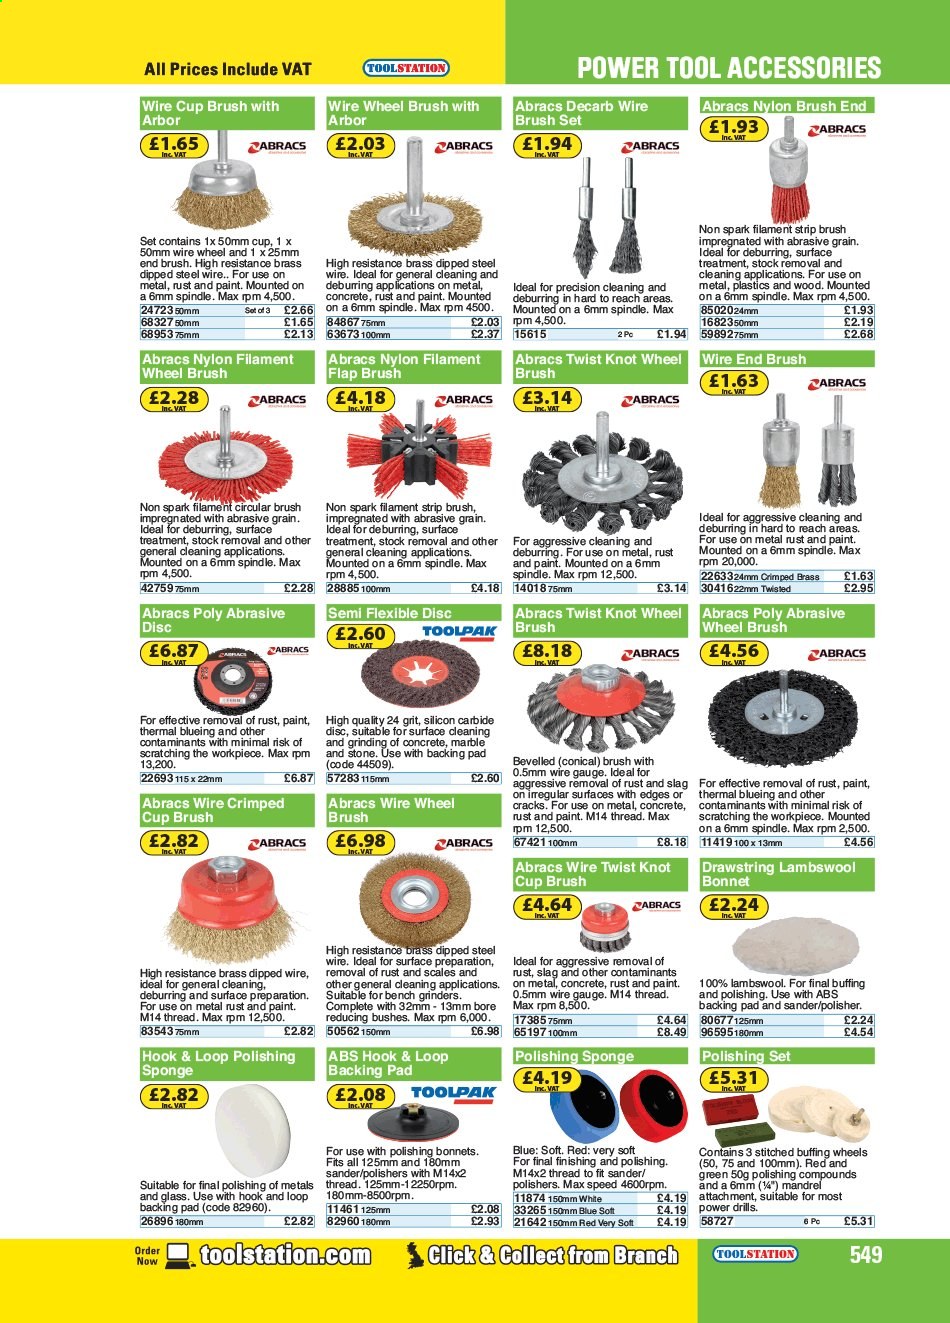 thumbnail - Toolstation offer  - Sales products - hook, drill, brush set, brush. Page 549.